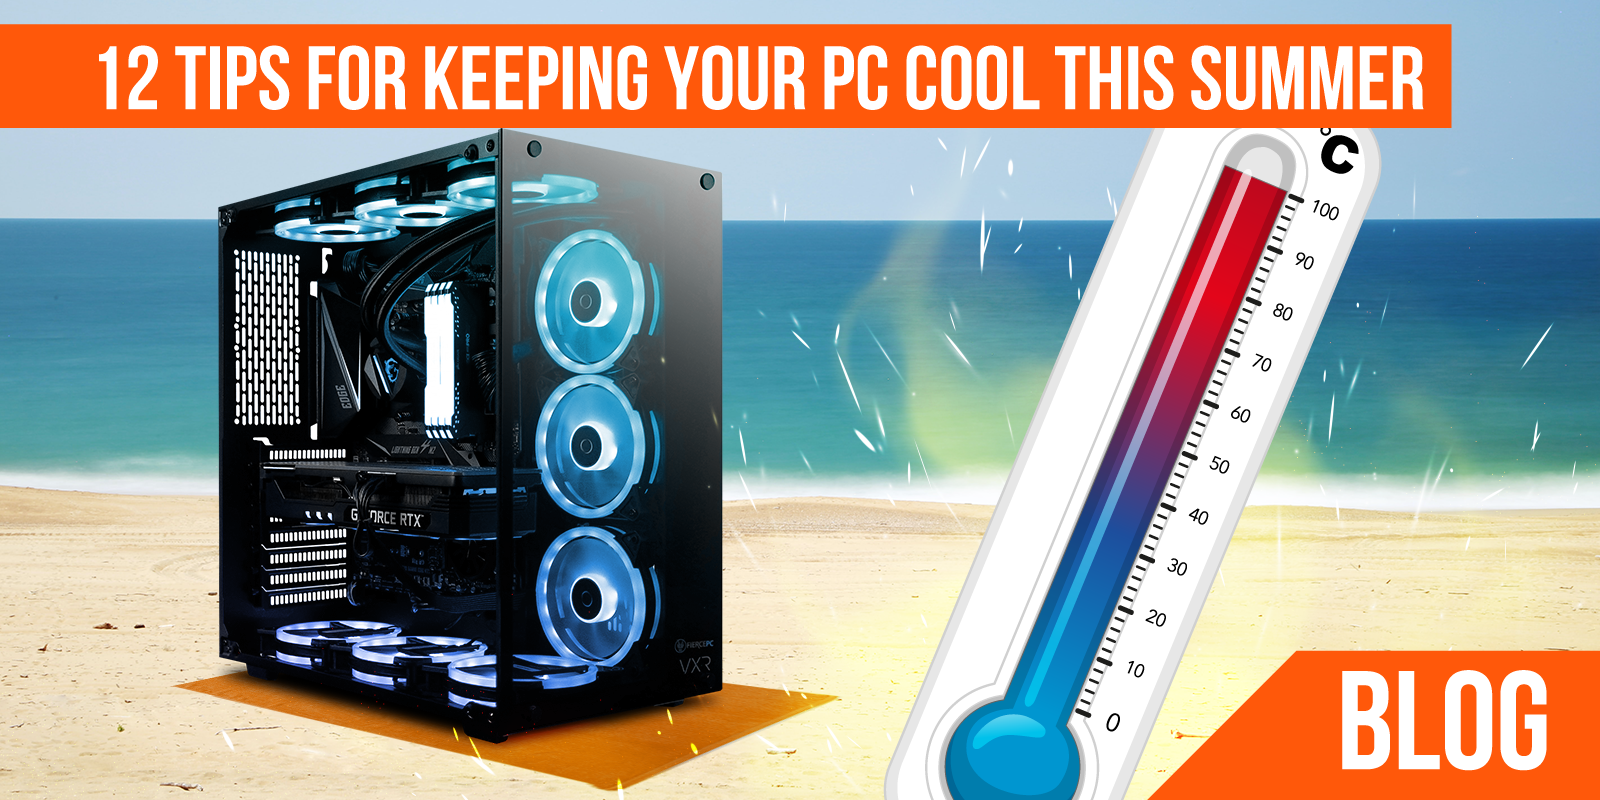 Does a PC run hotter in summer?